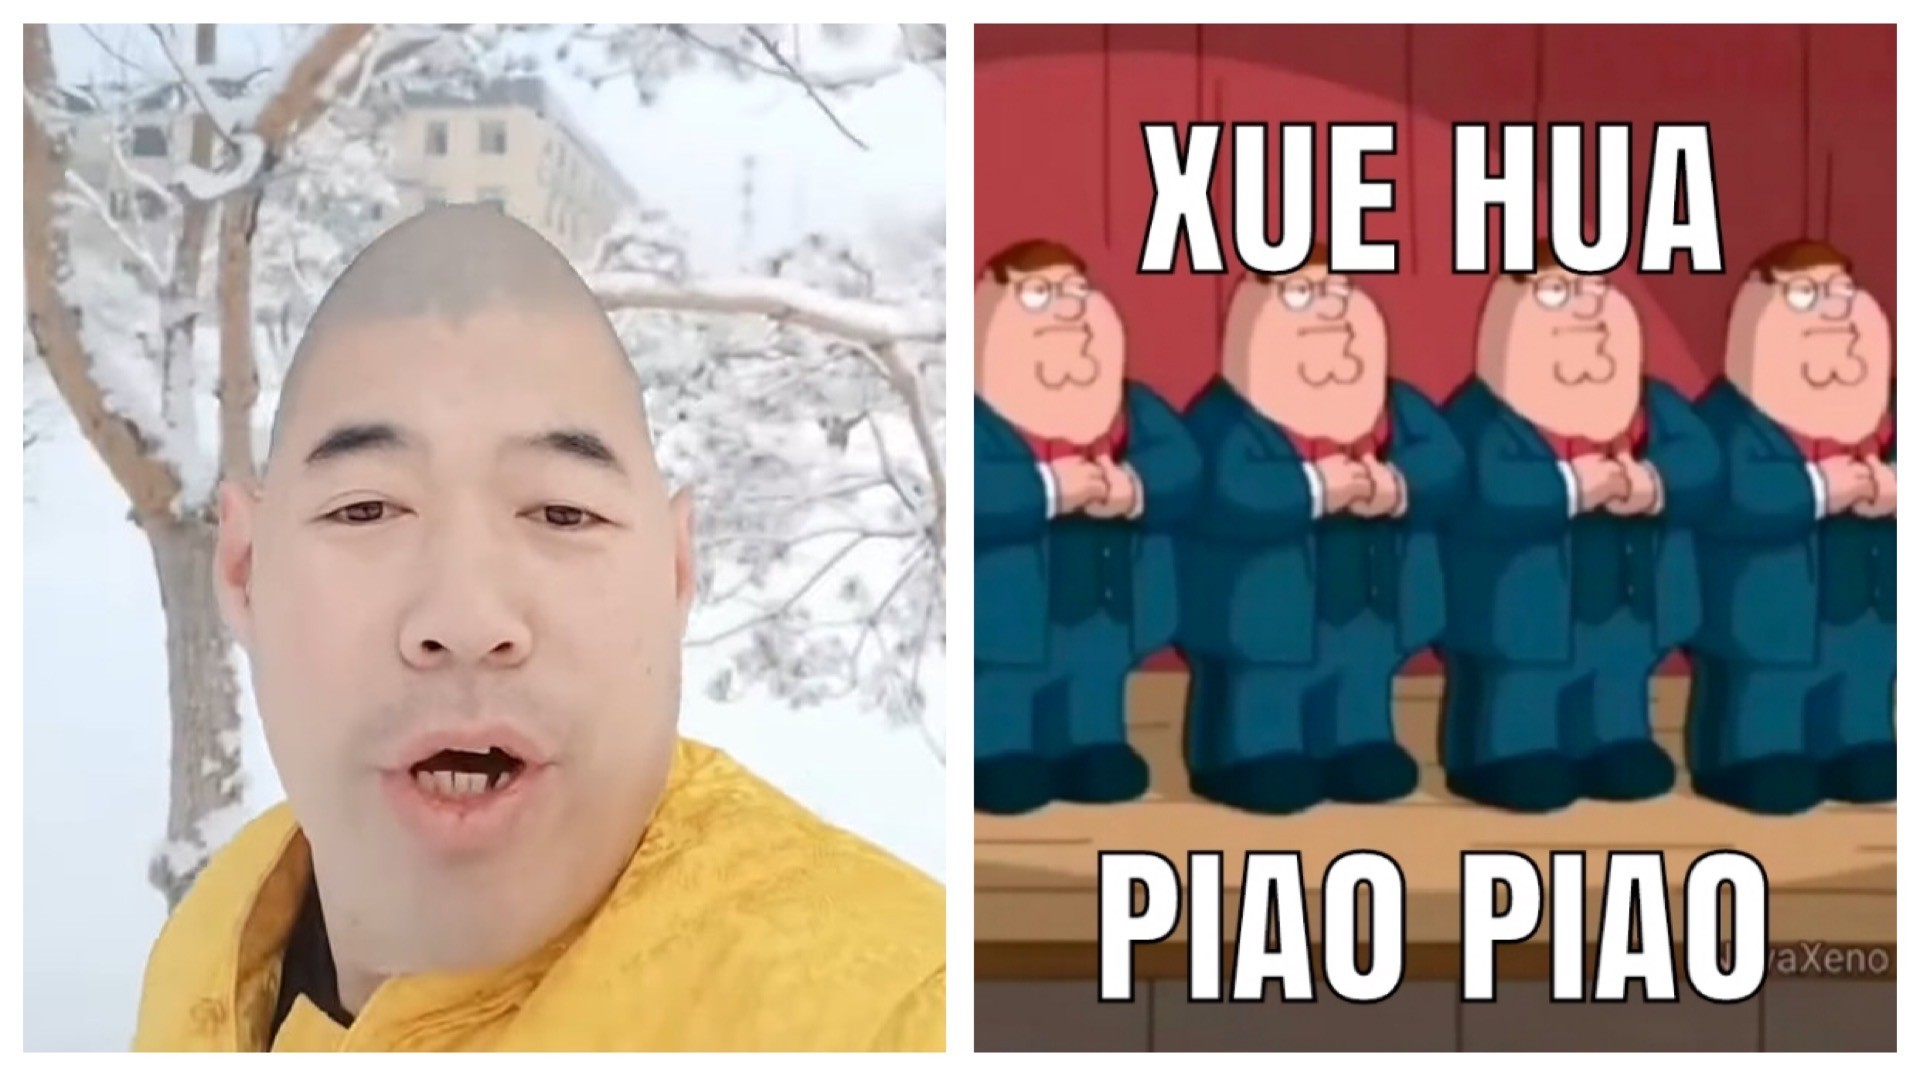 Learn the Popular Chinese Song “Xue Hua Piao Piao”